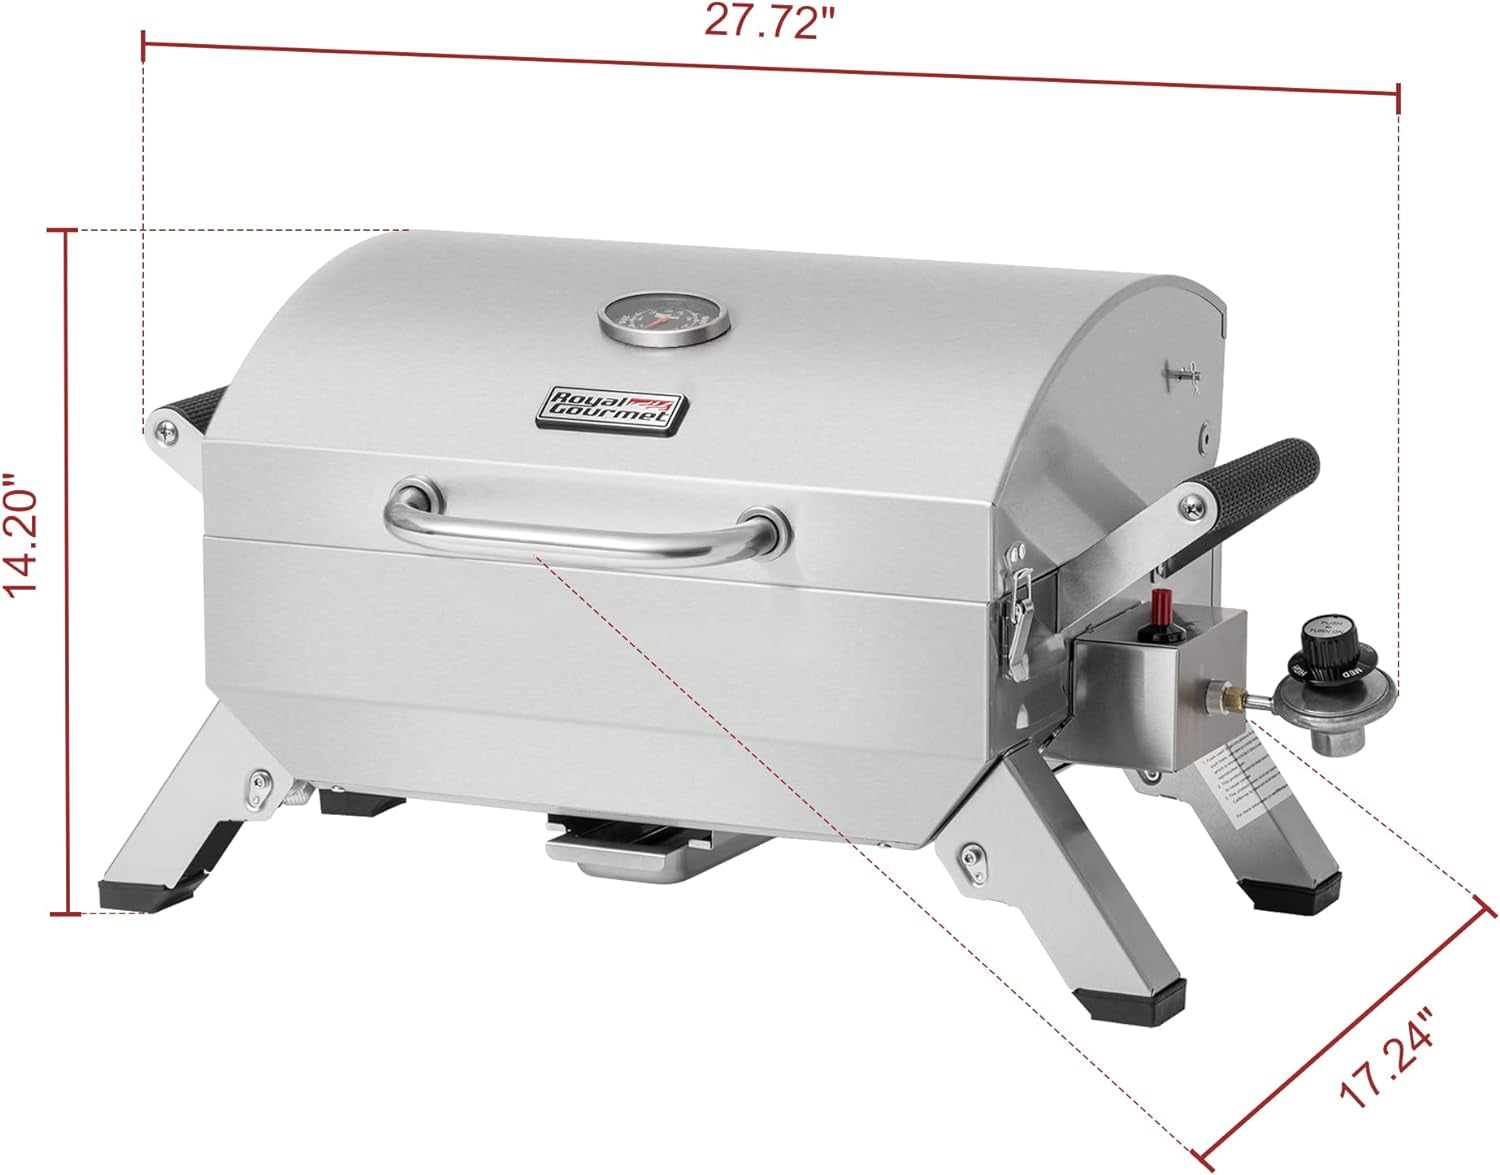 Stainless Steel Portable Grill with Two Handles and Travel Locks, Tabletop Propane Gas Grill with Folding Legs, 10000 BTU, for Picnic Cookout, GT2001, Silver